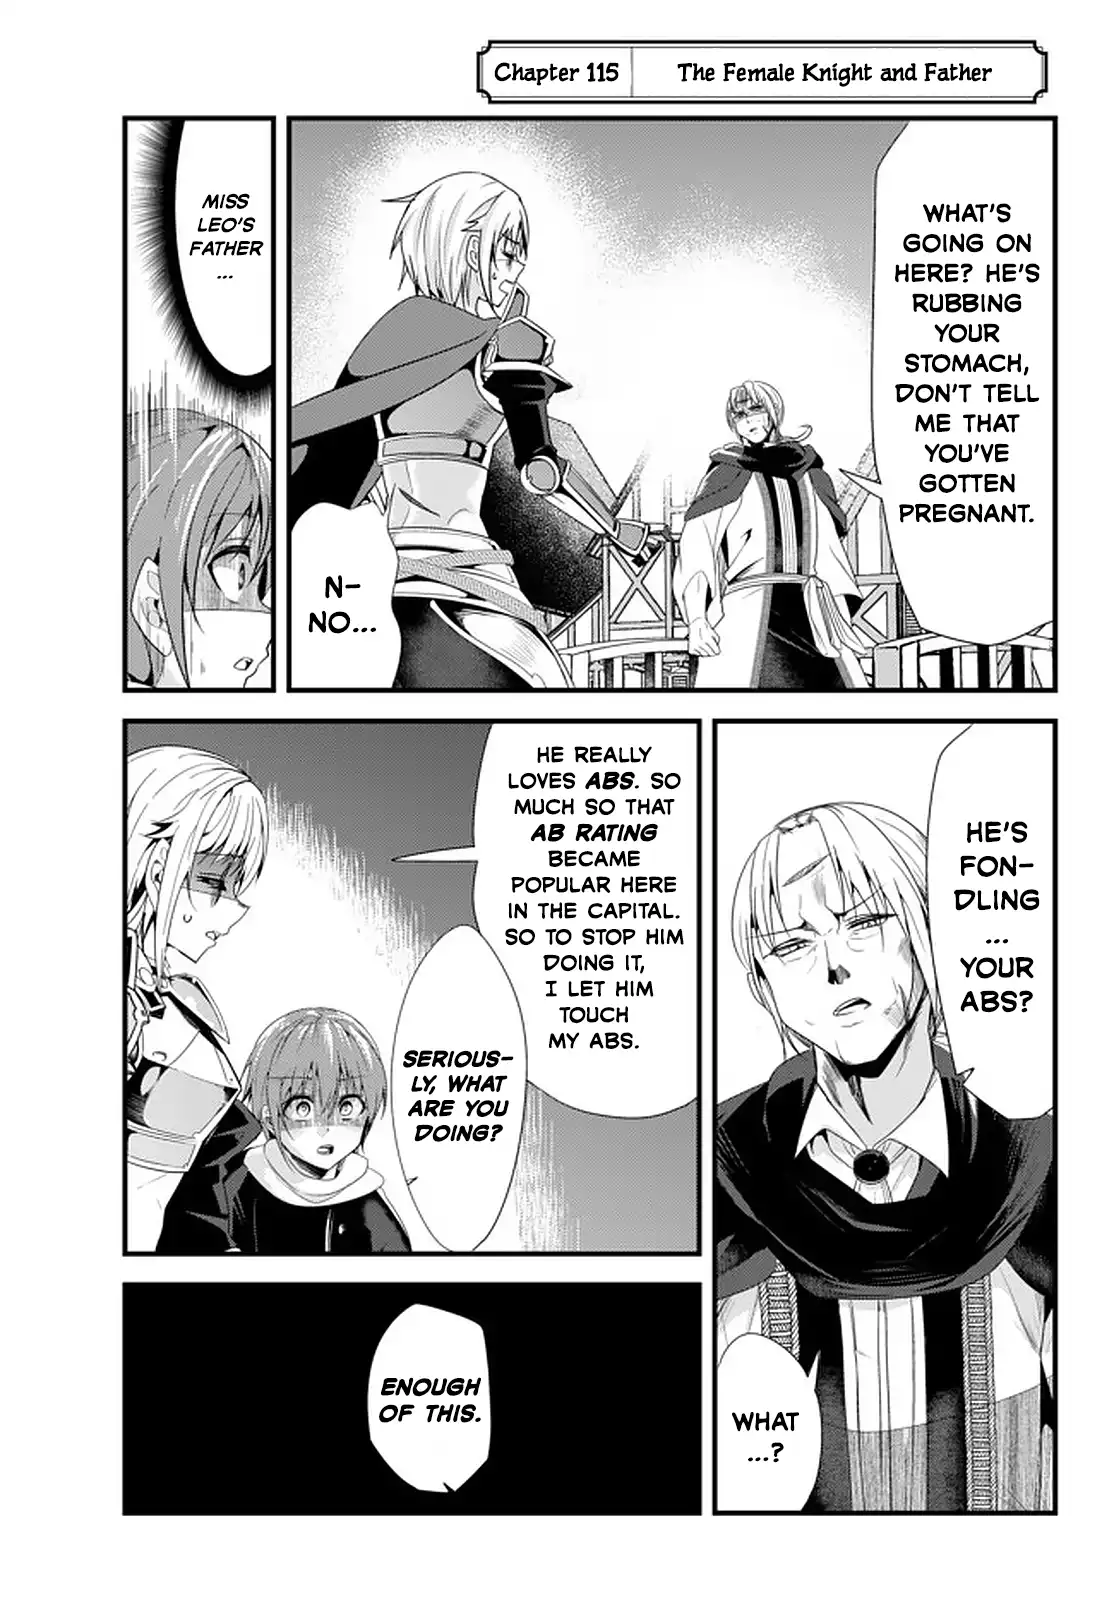 A Story About Treating a Female Knight, Who Has Never Been Treated as a Woman, as a Woman - Chapter 115 Page 1